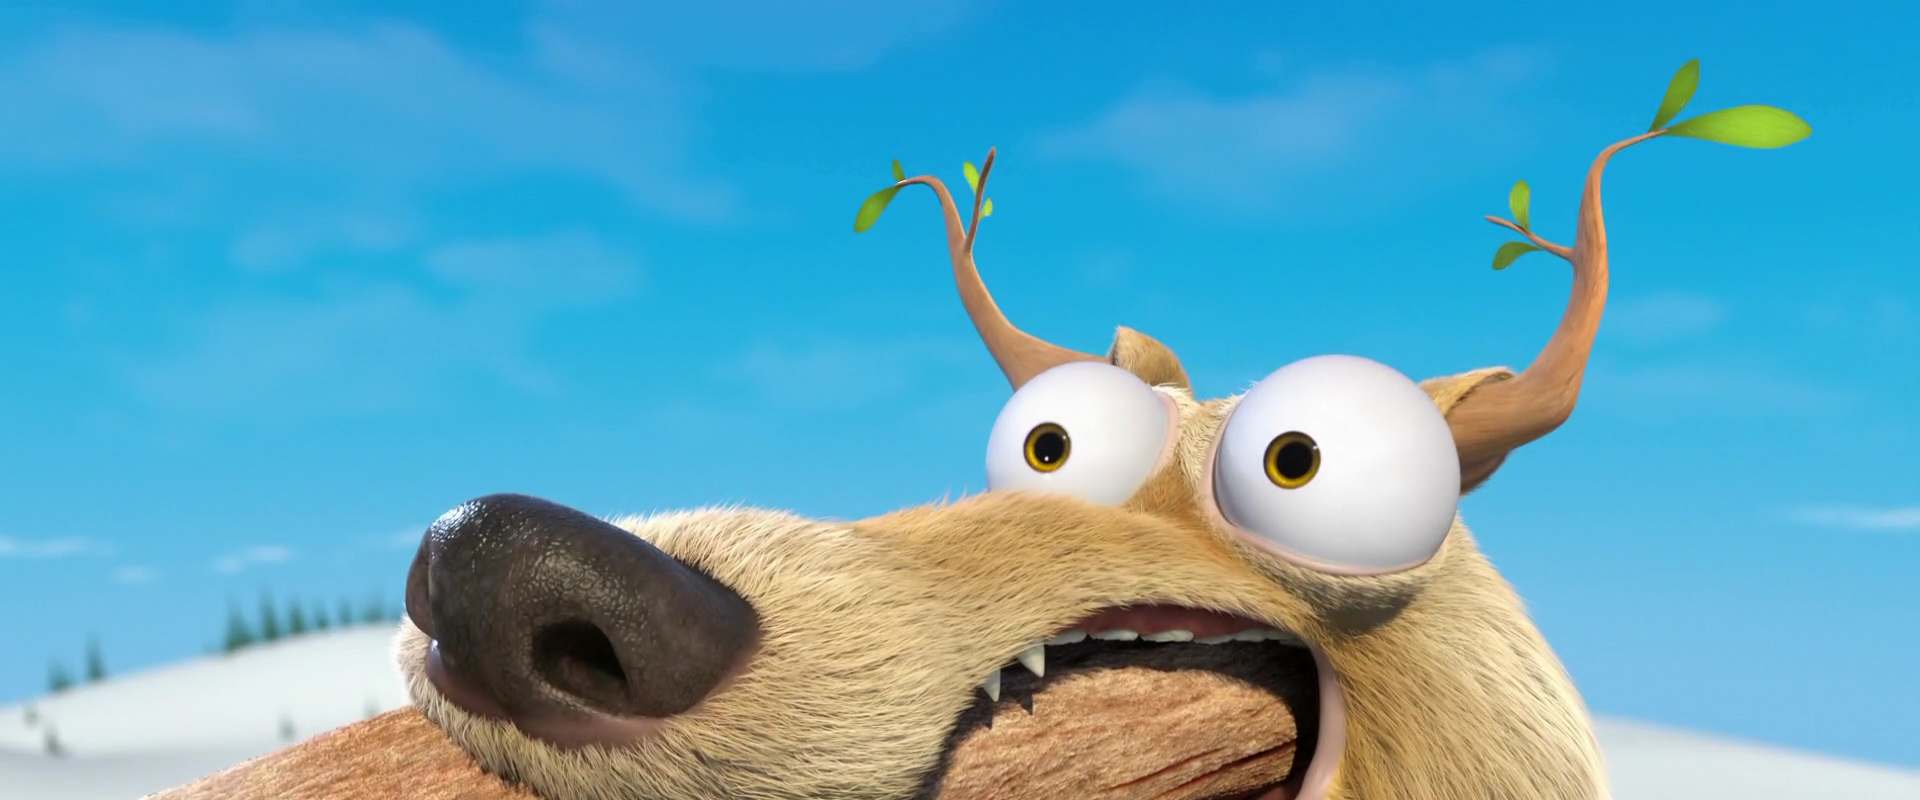 Ice Age: The Great Egg-Scapade background 2